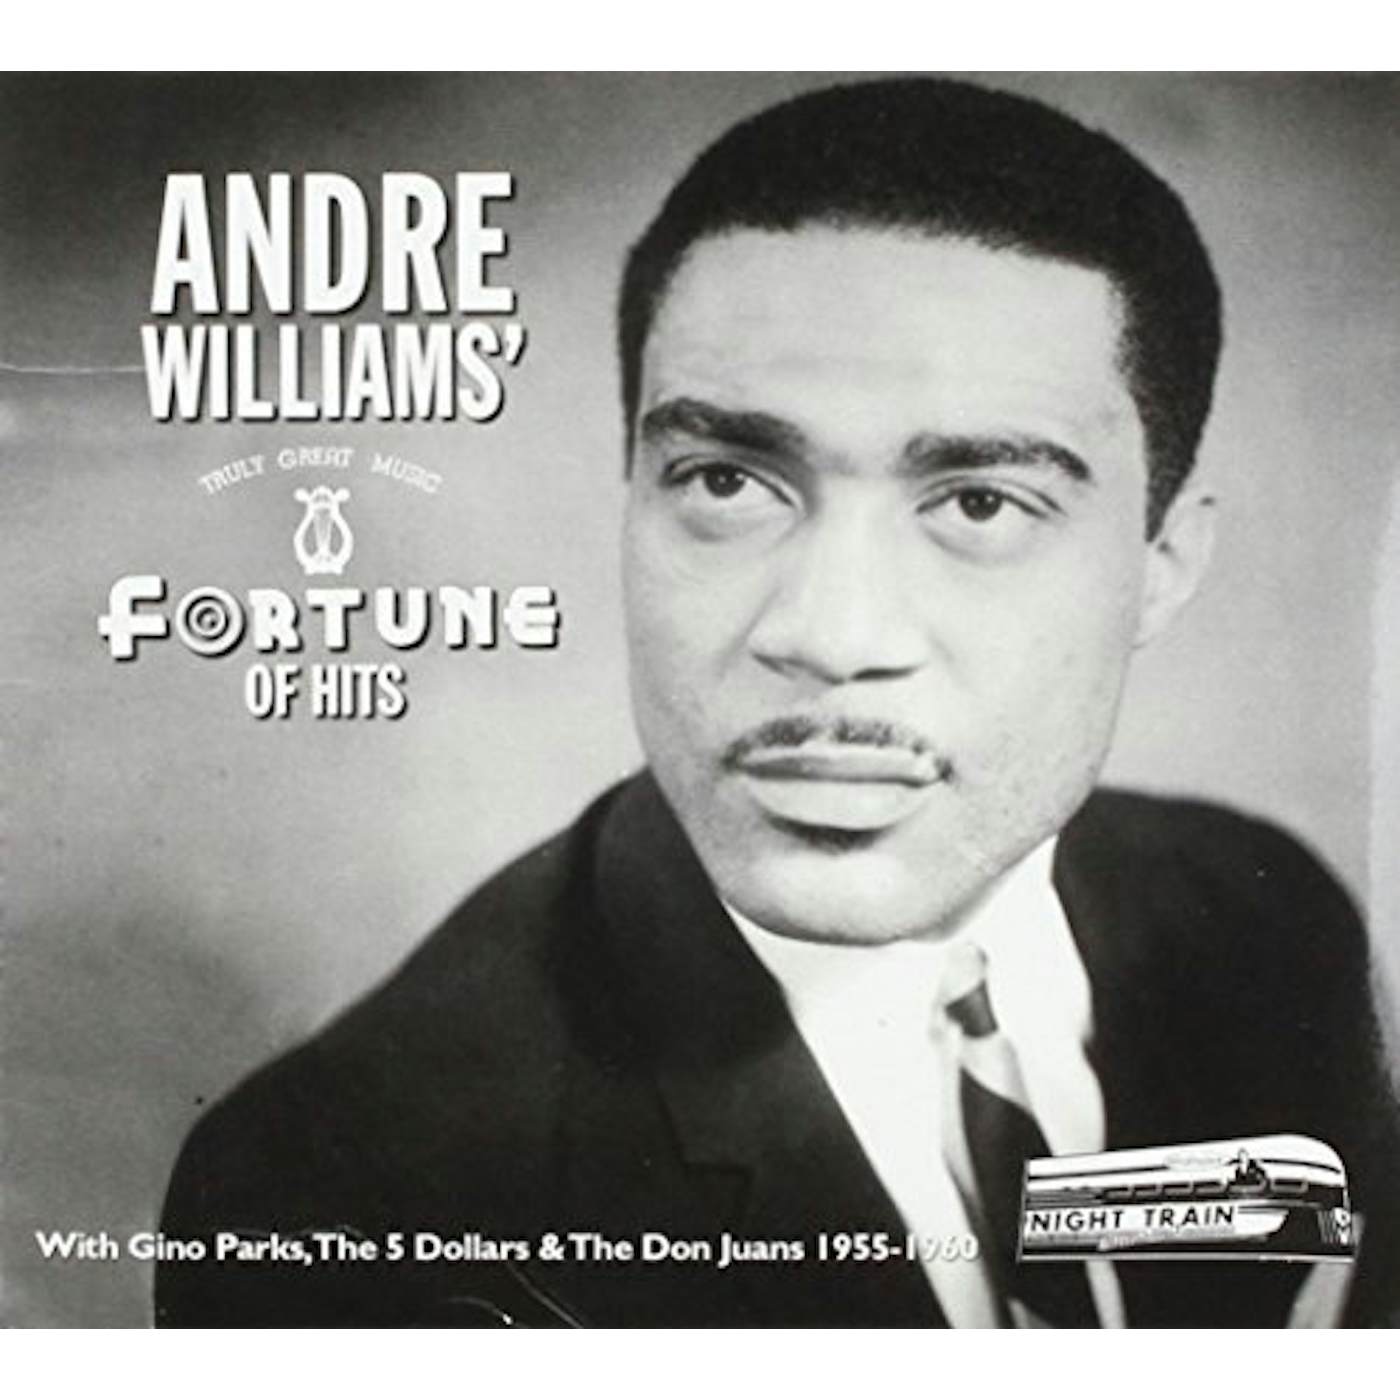 Andre Williams FORTUNE OF HITS CD